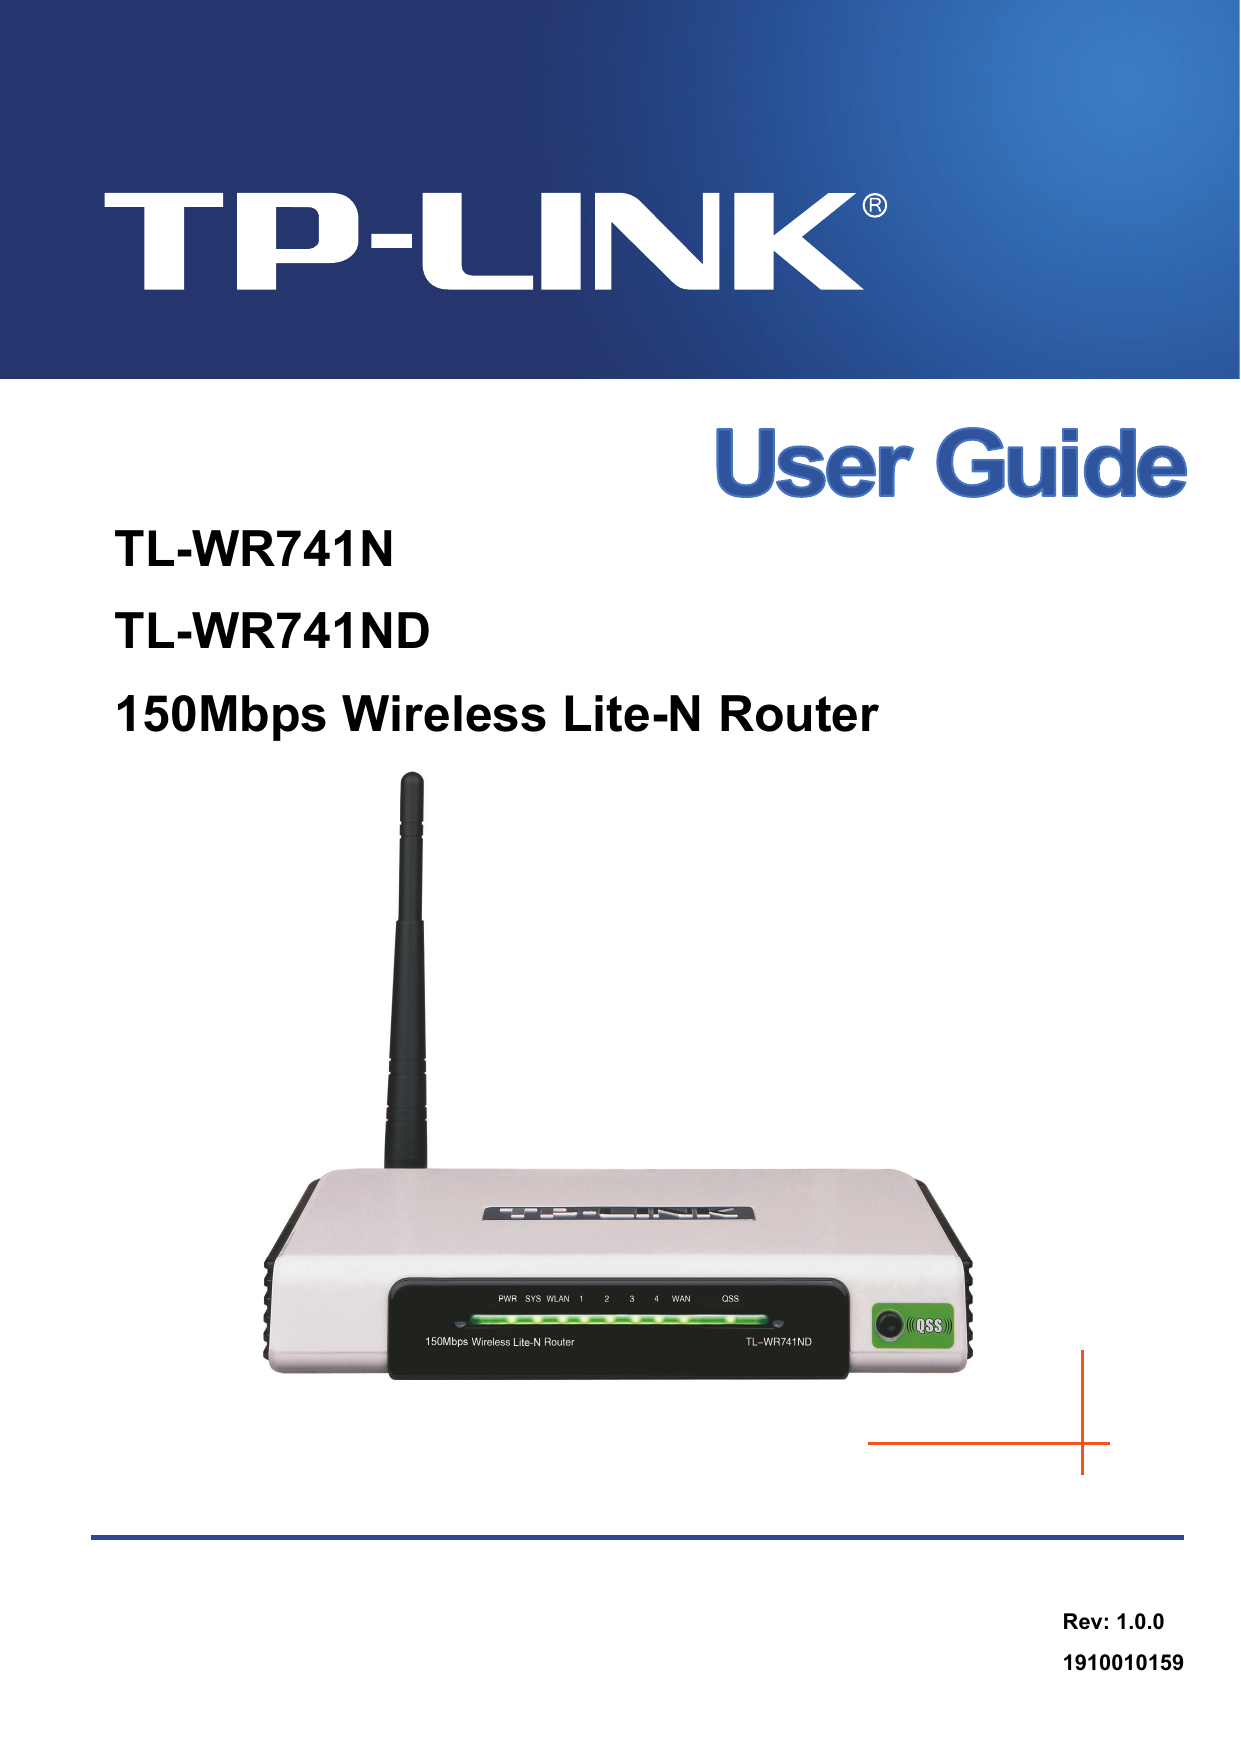     TL-WR741N TL-WR741ND 150Mbps Wireless Lite-N Router  Rev: 1.0.0 1910010159 